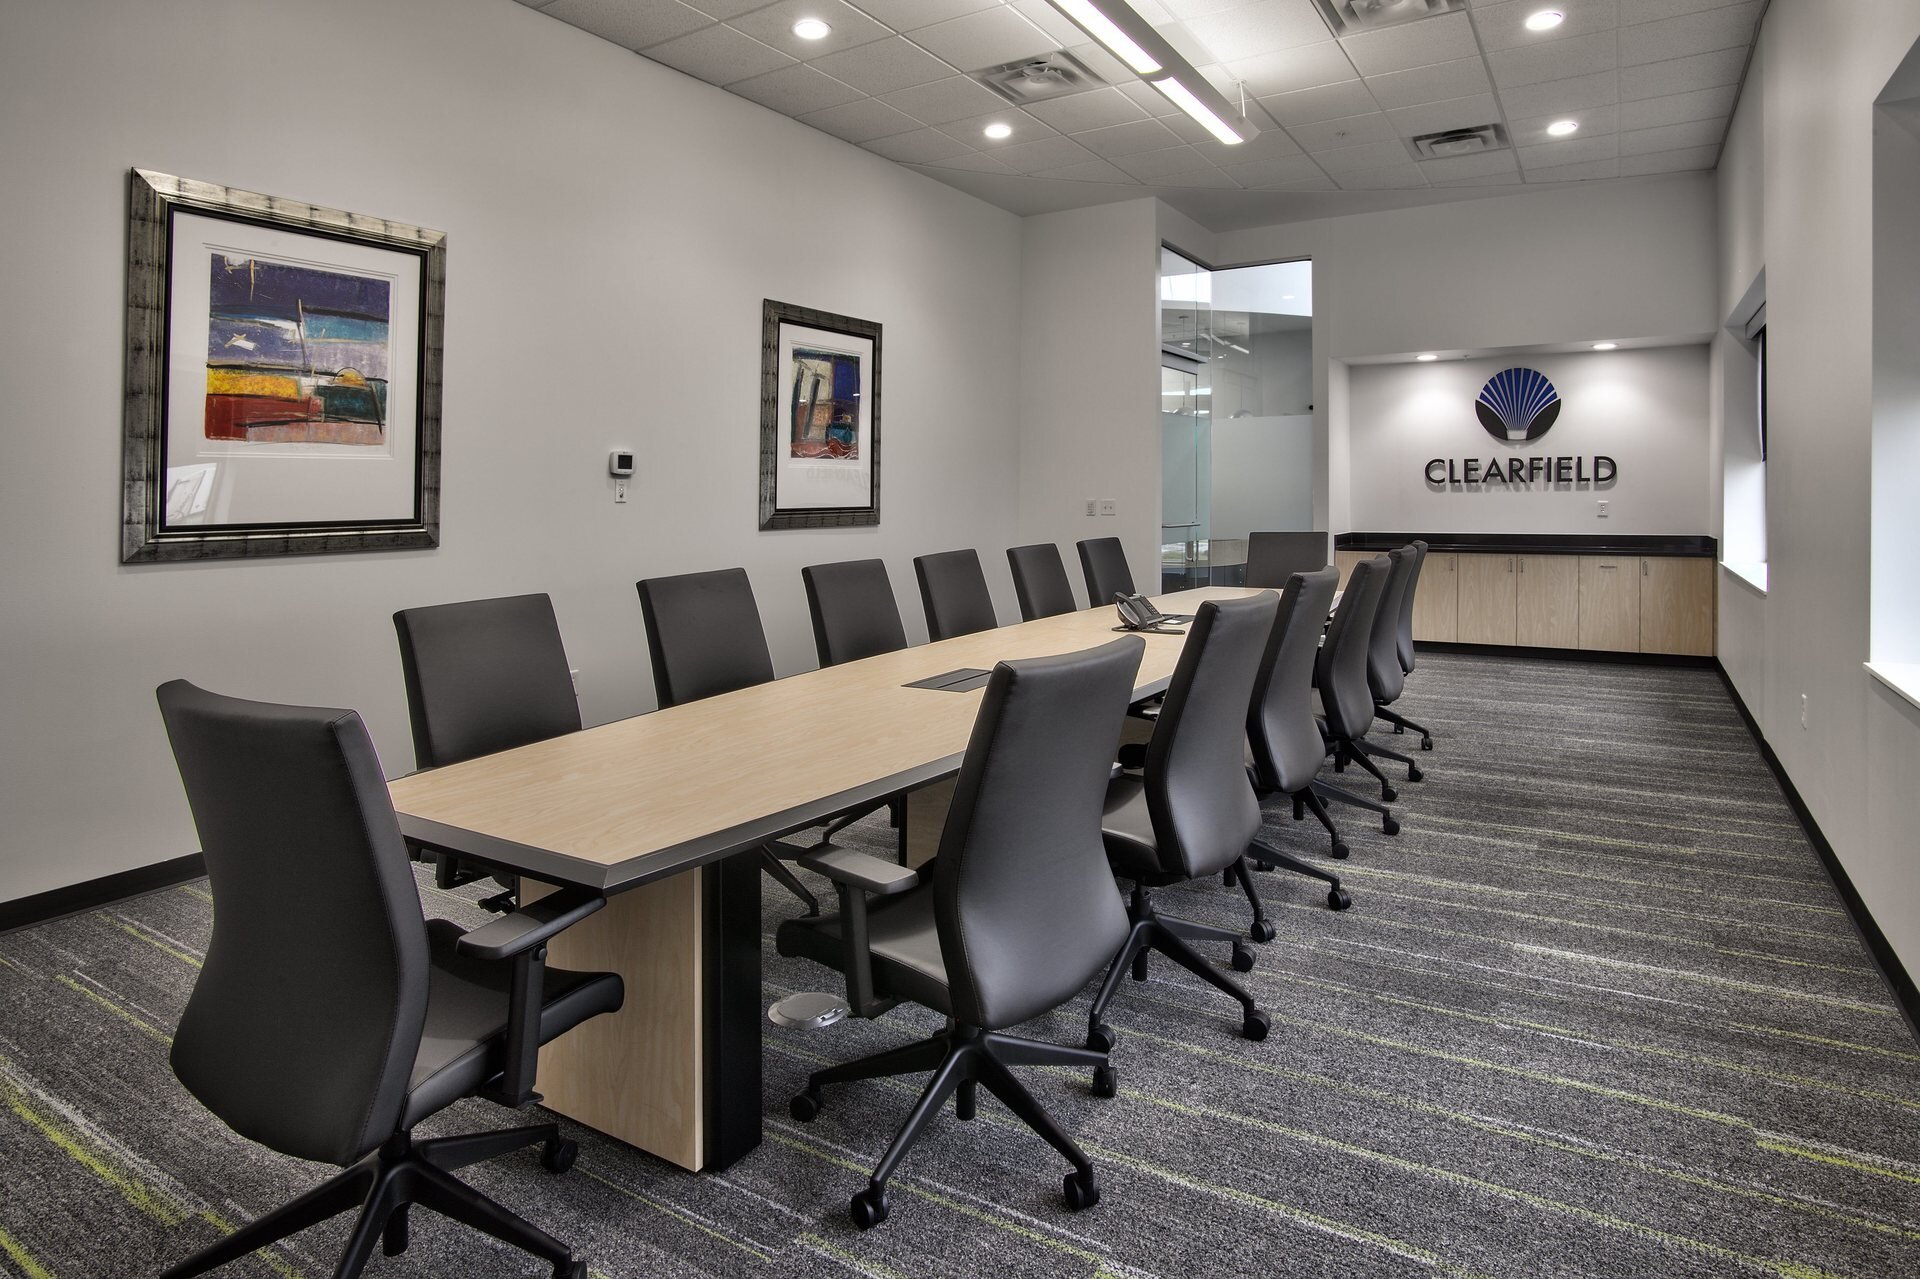 hcm-architects-clearfield-hagen-christensen-mcilwain-architects-plymouth-minnesota-conference-room-1920x1920.jpeg